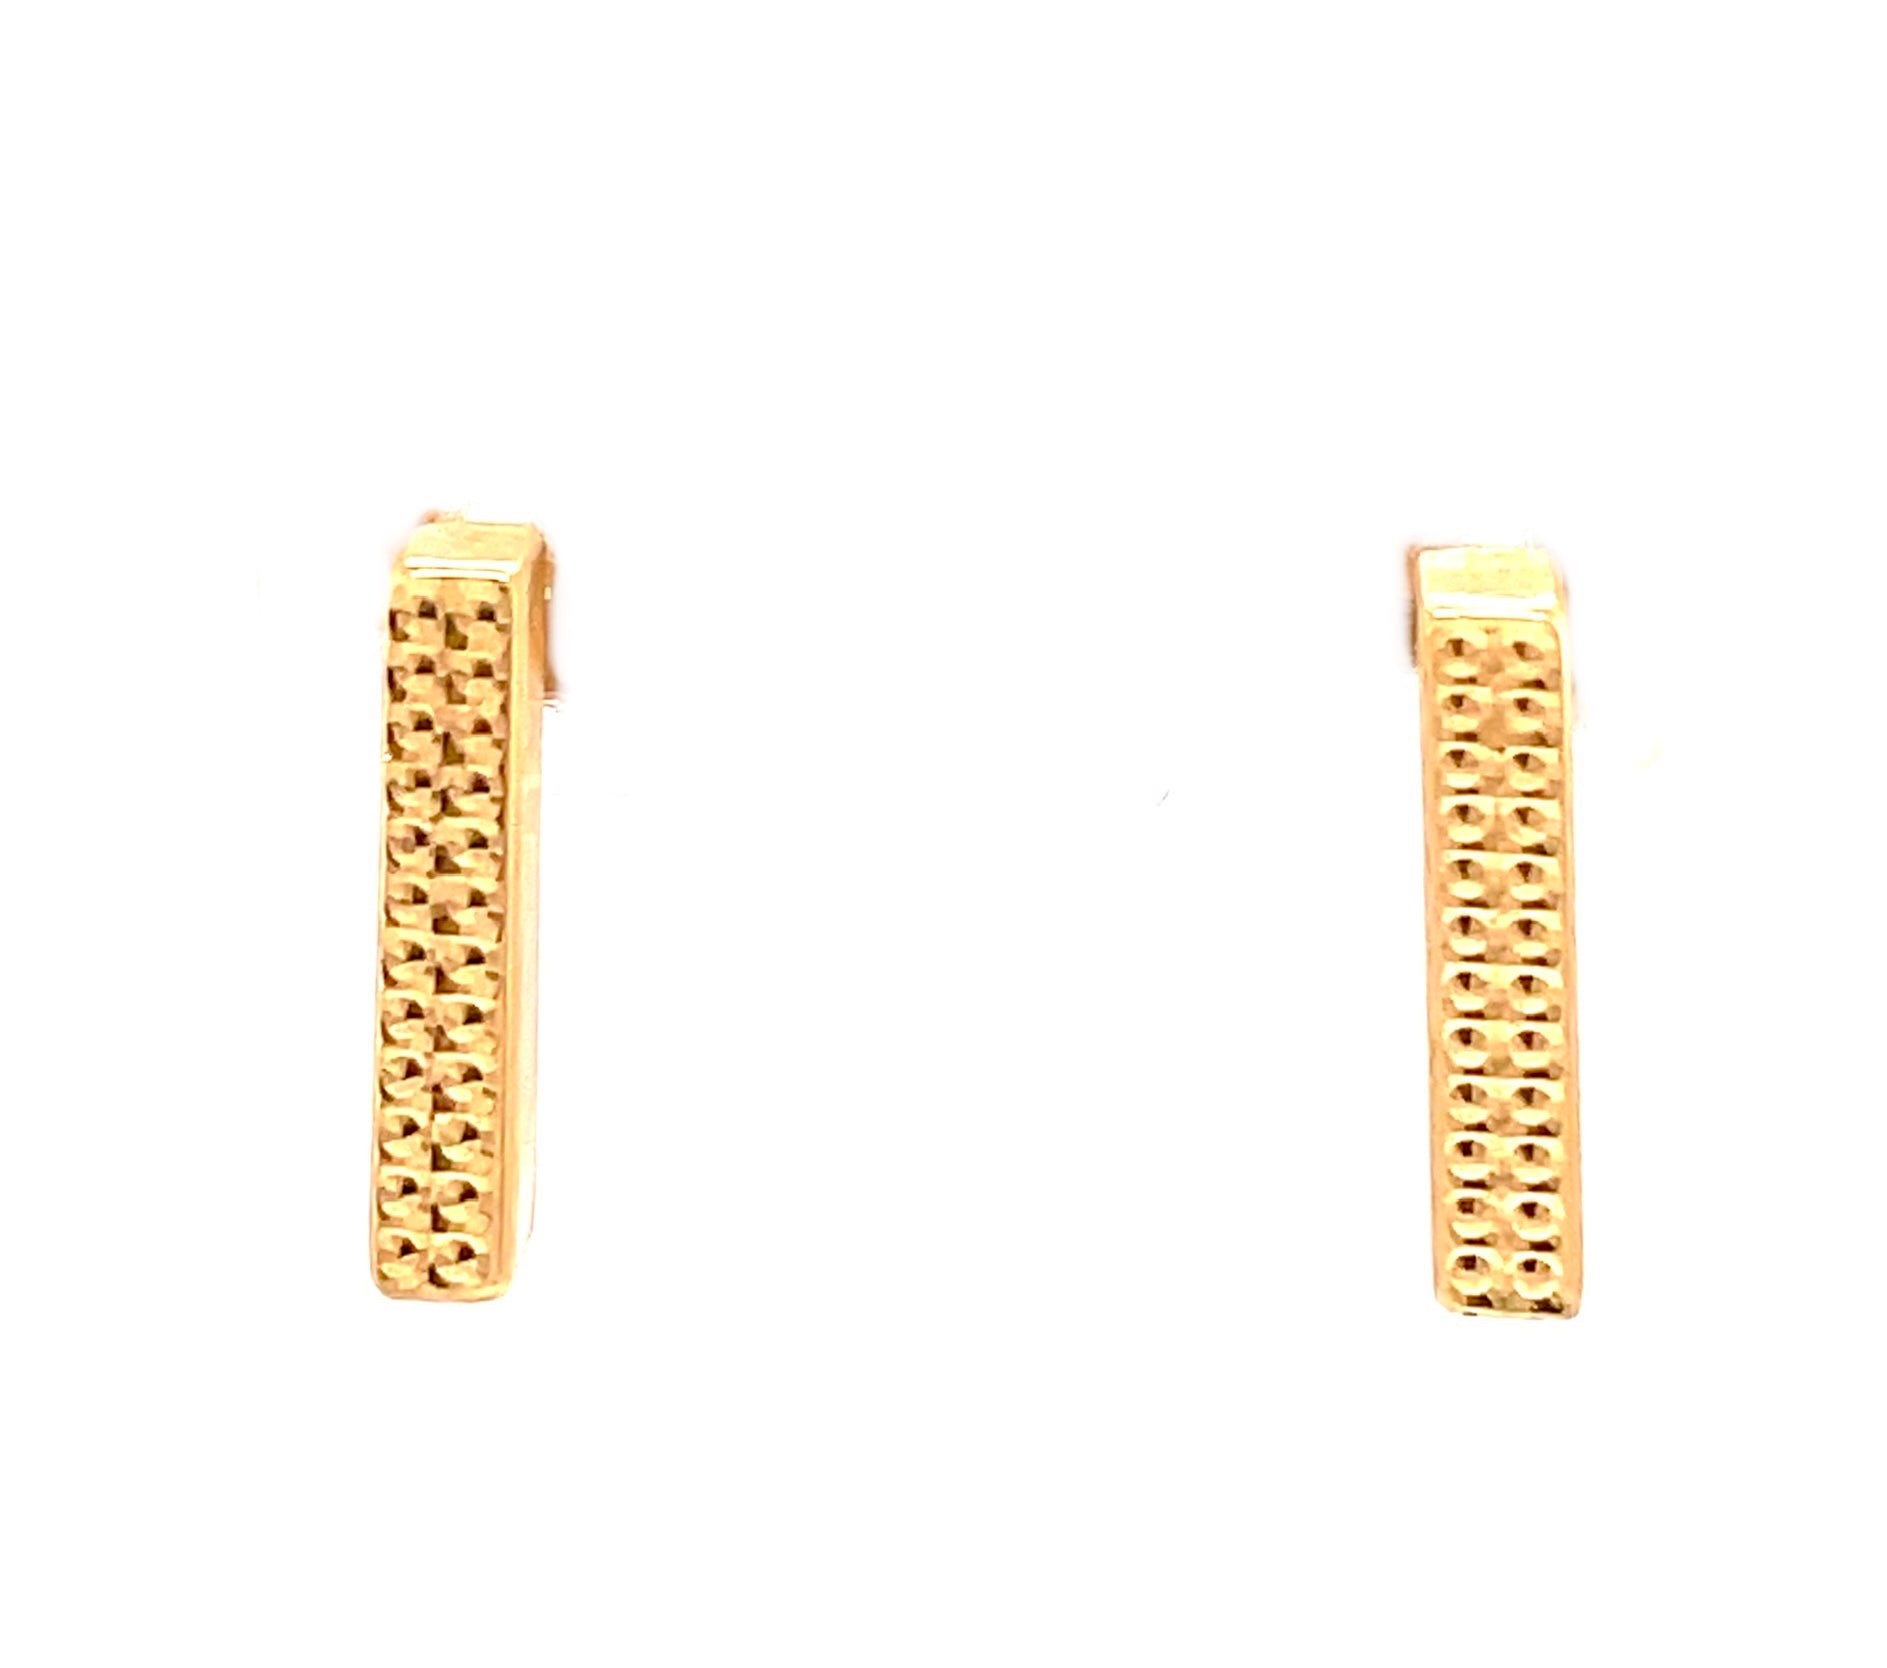 The 14k yellow gold and Italian-made design ensures long-lasting durability and a secure fit, so you can wear these earrings with confidence. The rectangular shape adds a touch of elegance and sophistication to any look. 12.50 mm